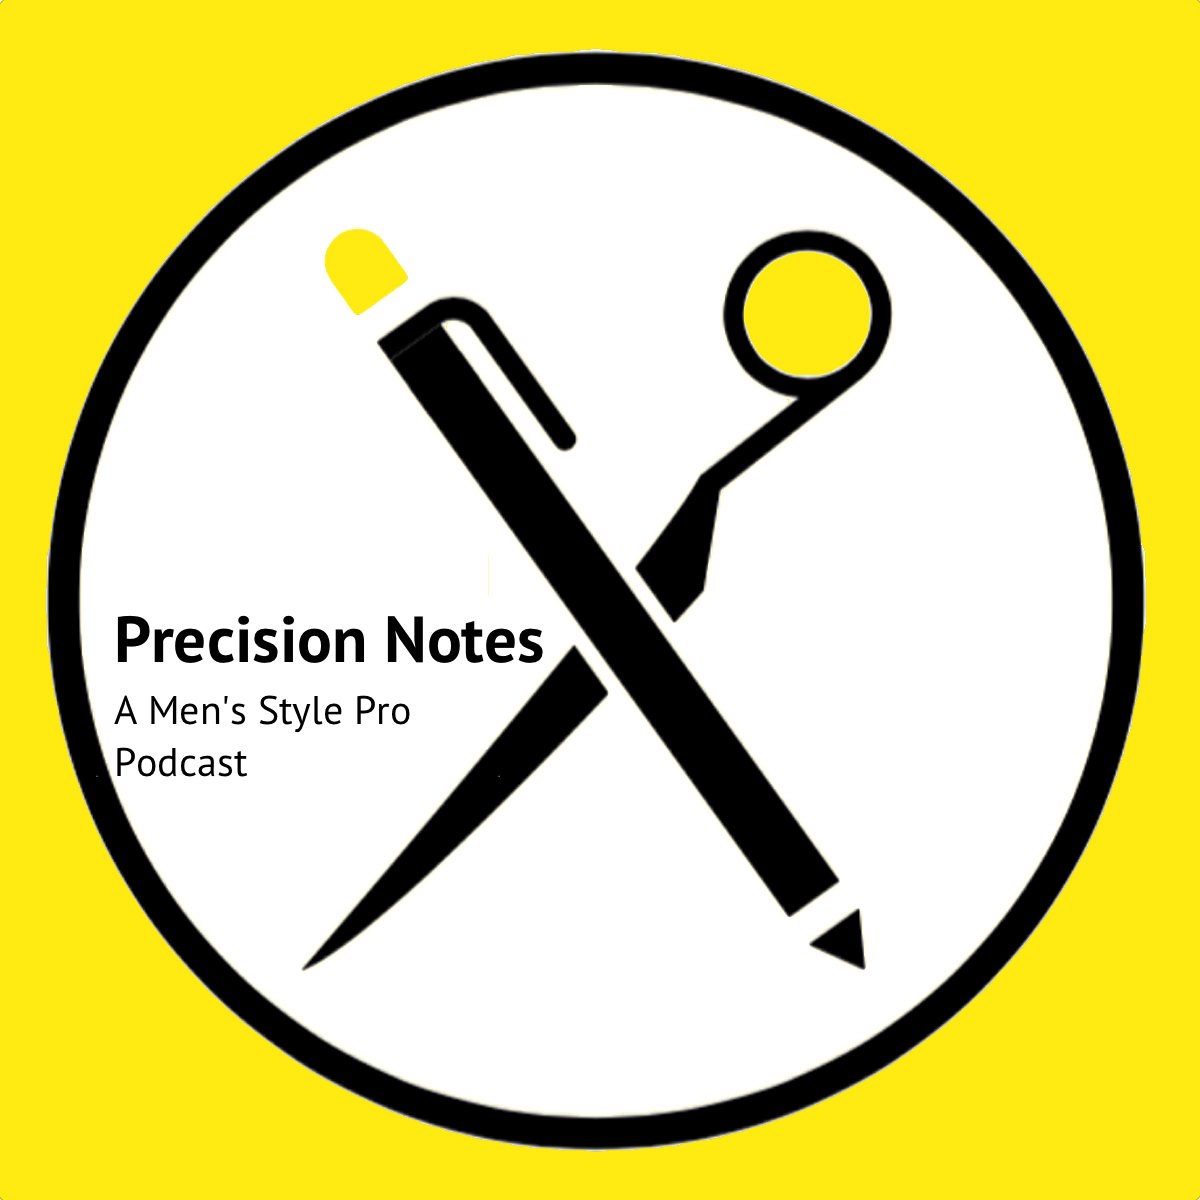 Precision Notes - a Men's Style Pro Podcast